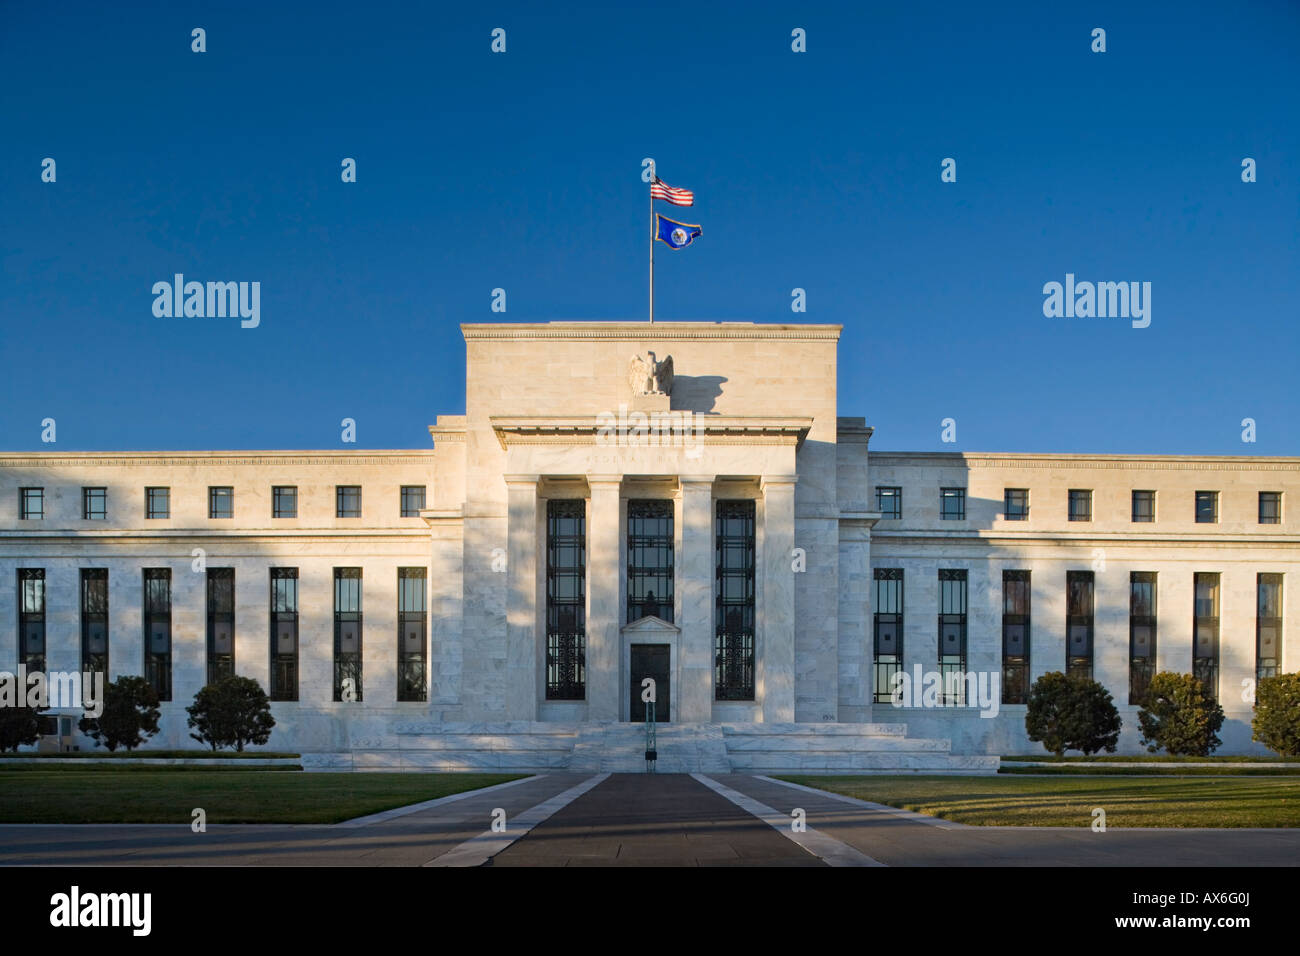 The Fed, Federal Reserve Bank, Washington DC. Main entrance on Constitution Avenue near the National Mall. Stock Photo